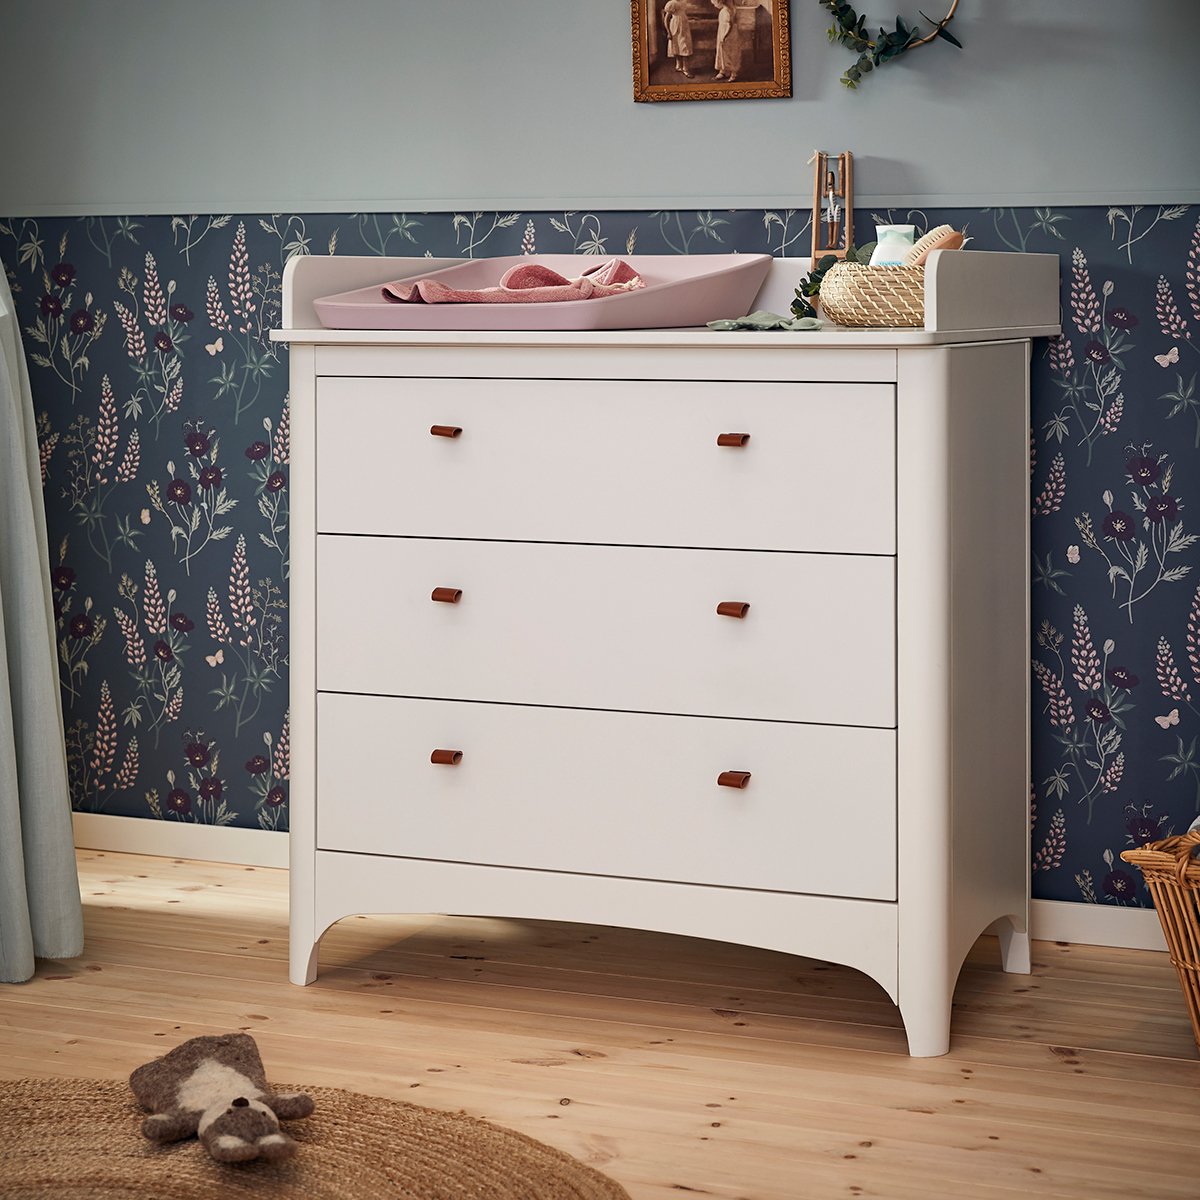 Leander Leander Changing Unit voor Classic Commode White - Decomusy